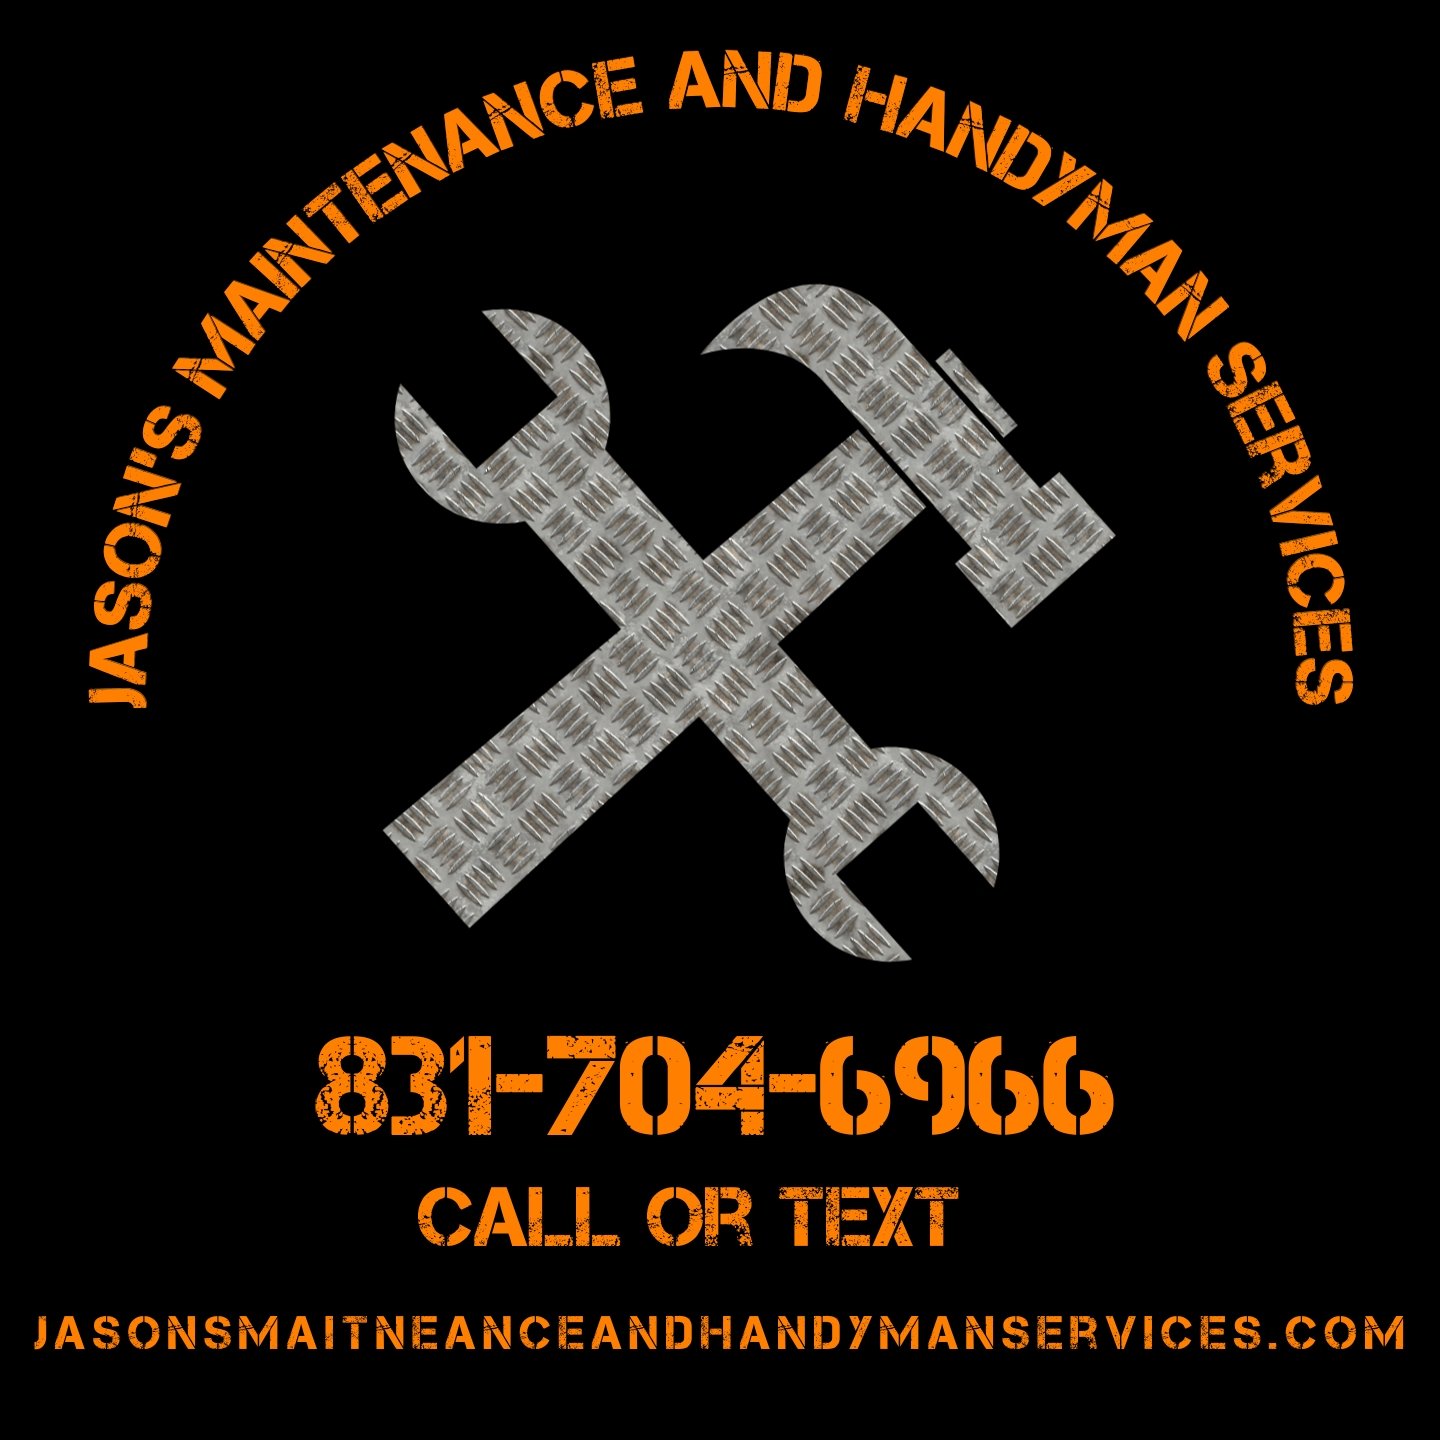 Jason's Maintenance and Handyman Services - Unlicensed Contractor Logo